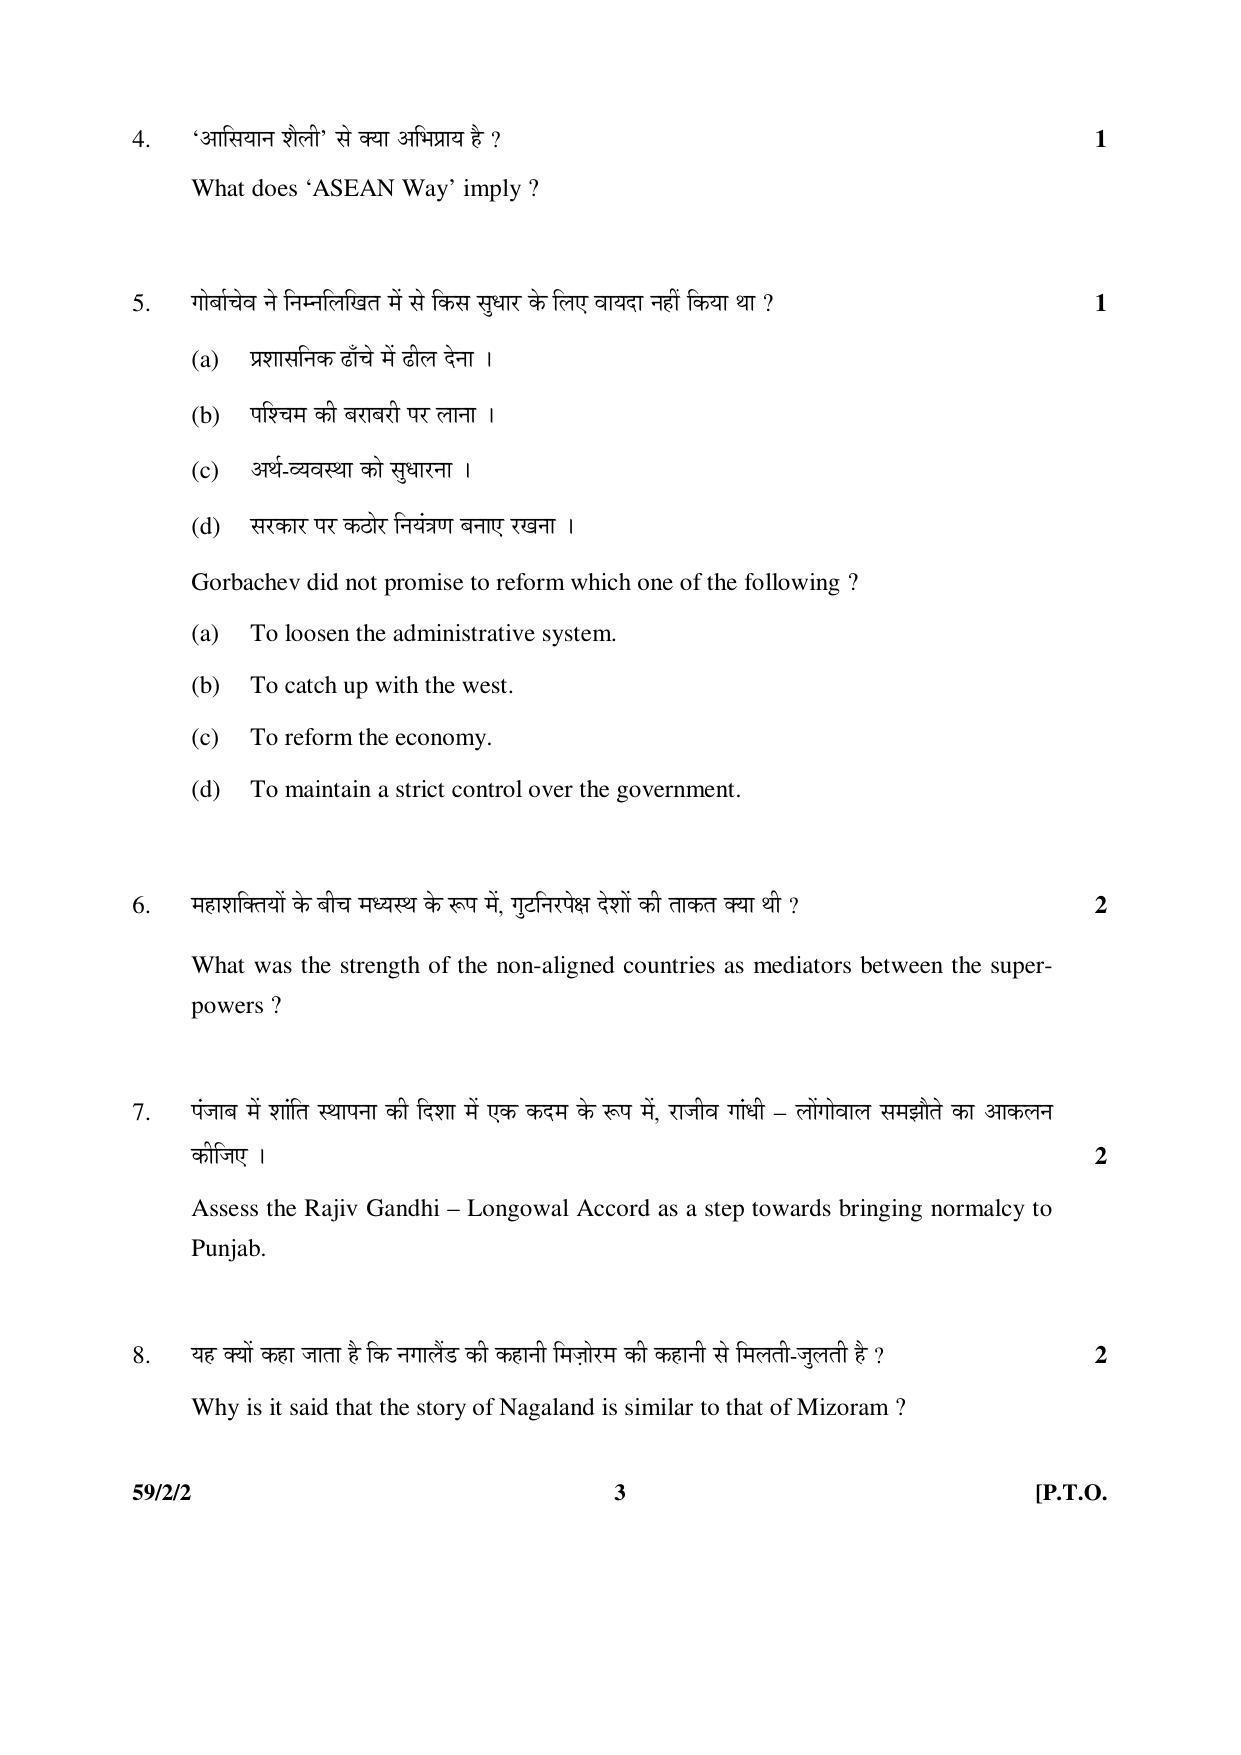 CBSE Class 12 59-2-2 _Political Science 2016 Question Paper - Page 3